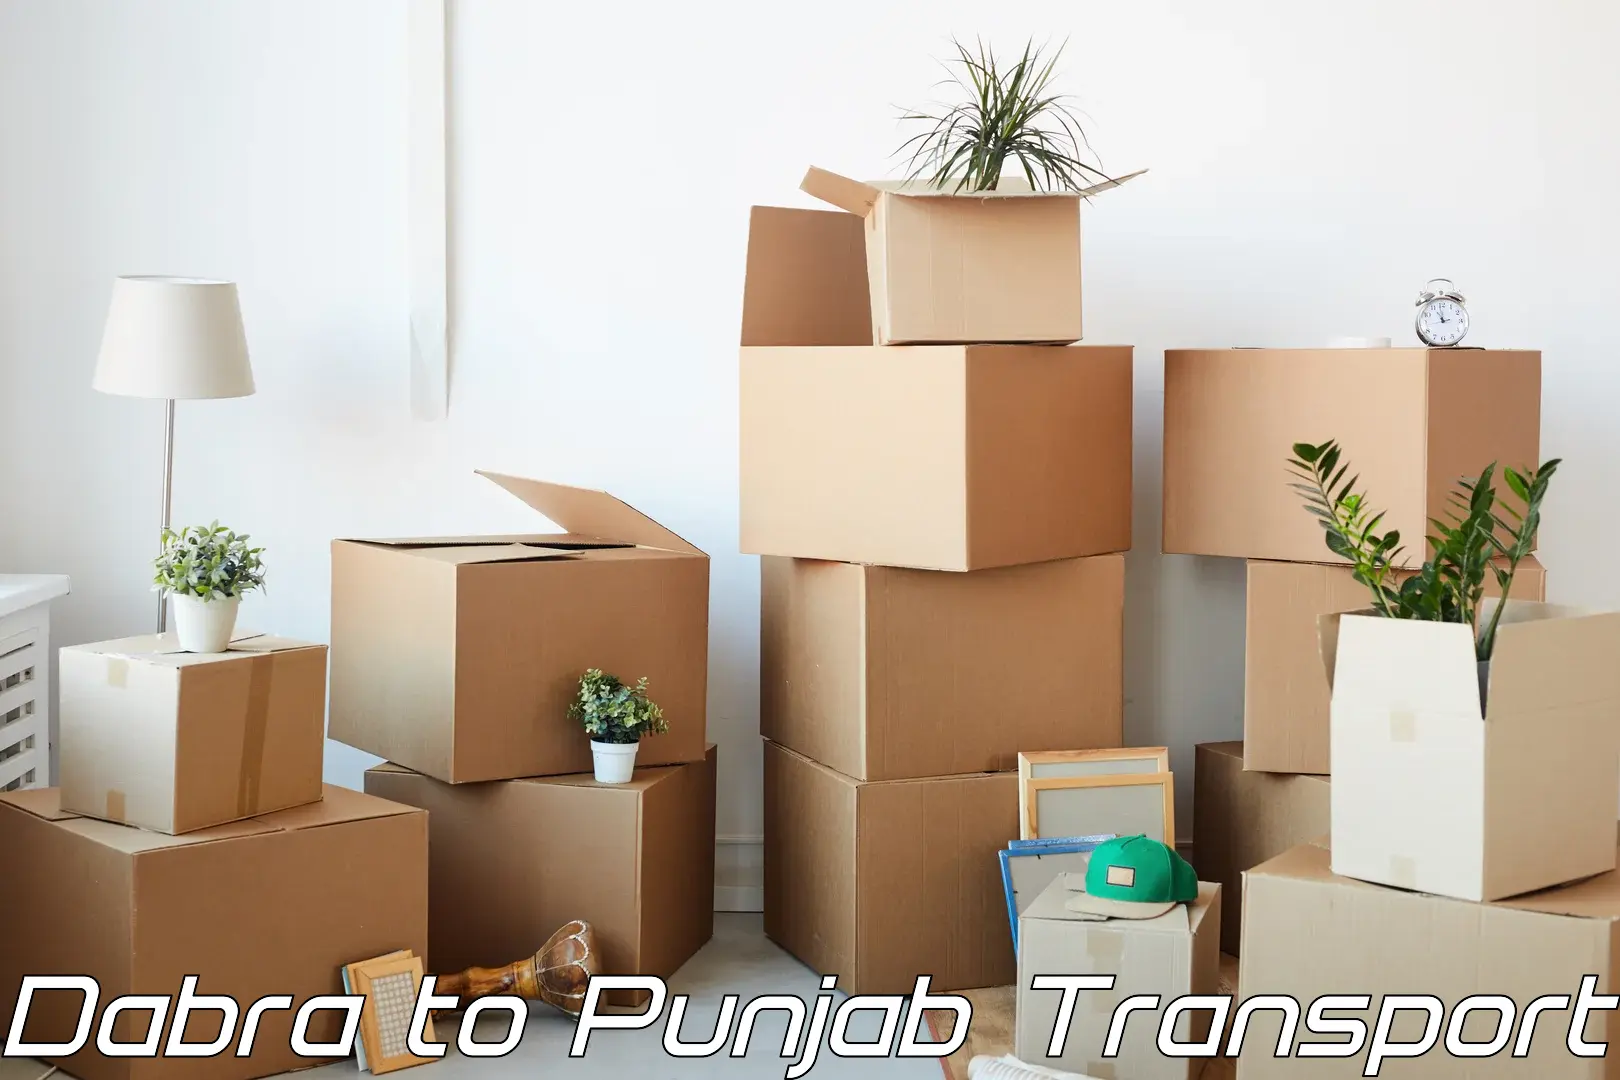 Part load transport service in India Dabra to Bathinda